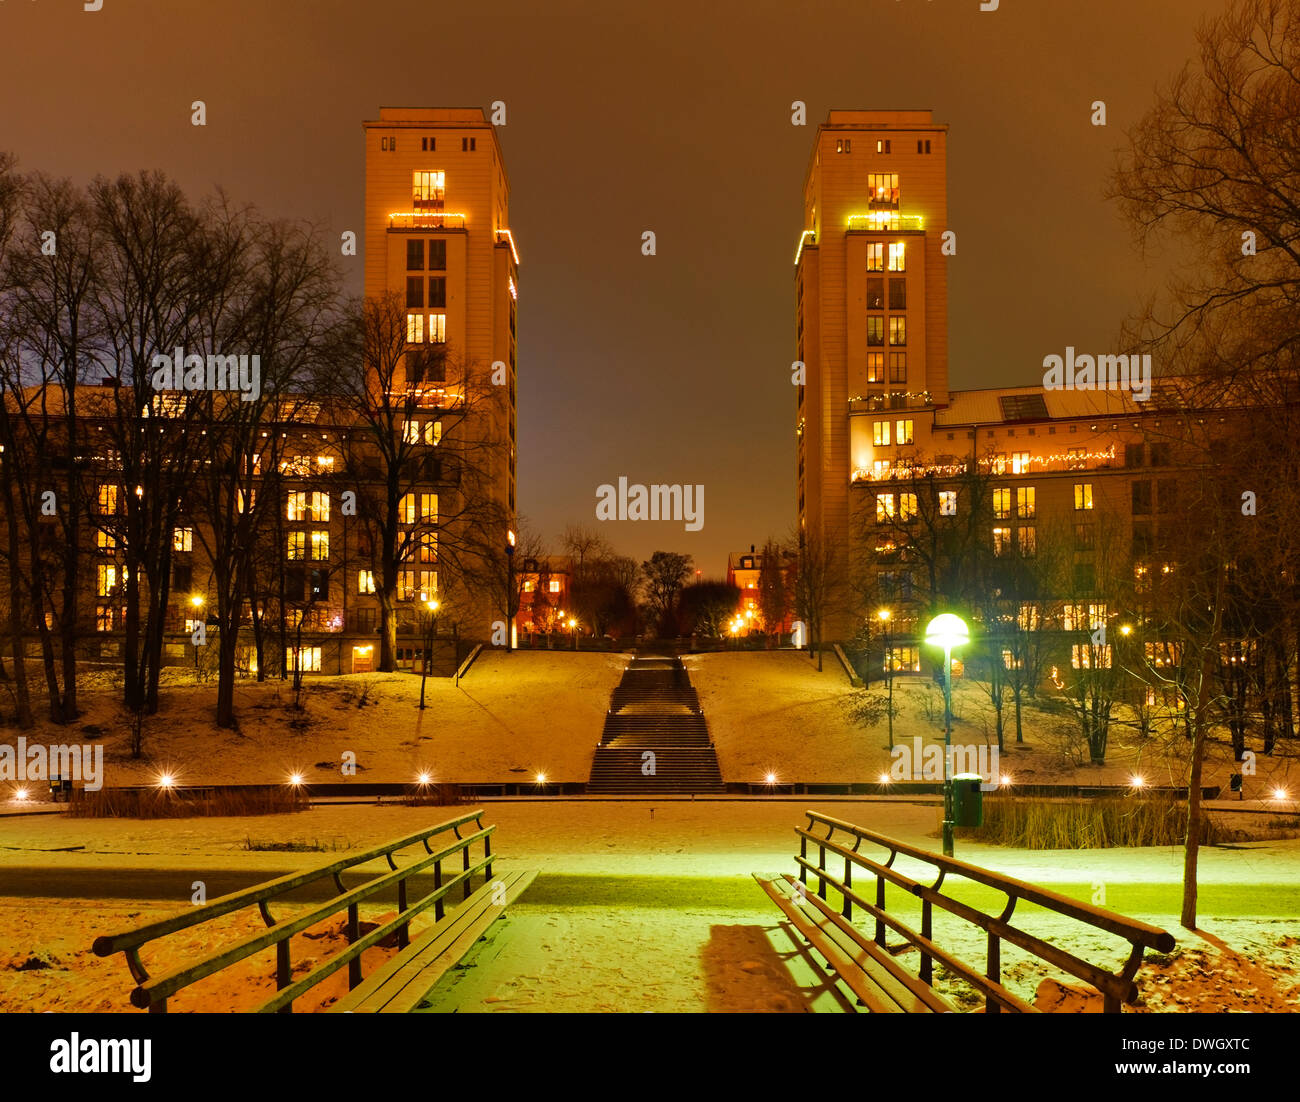 Winter night view of twin apartment buildings with towers, Grubben area, Kungsholmen, Stockholm, Sweden. Stock Photo